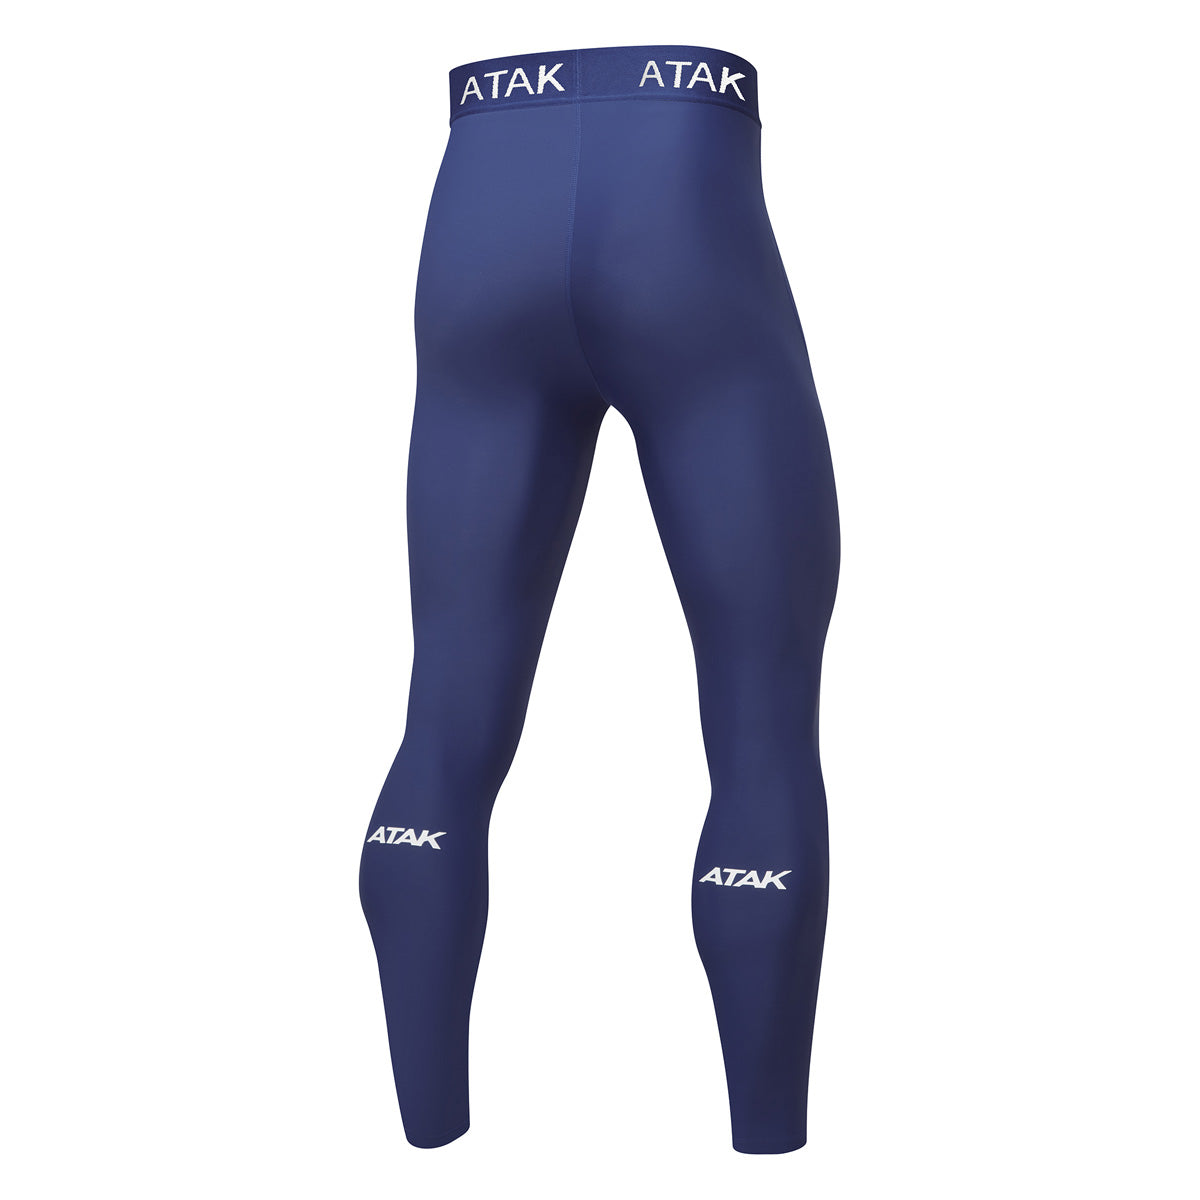 Photo of the Atak Adult Compression Legging in Navy, back view